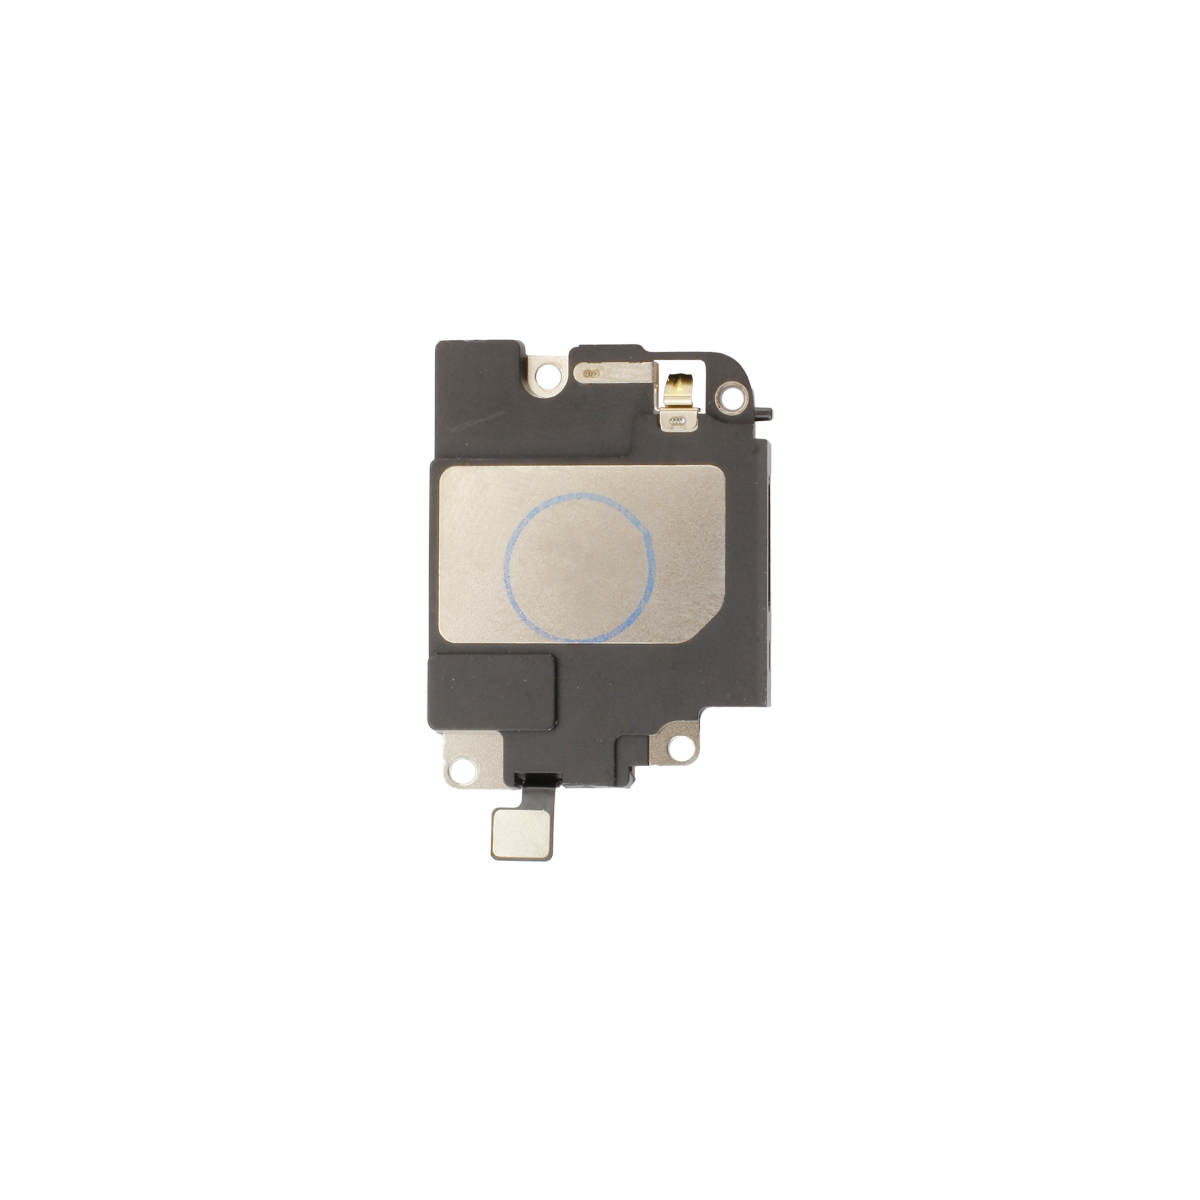 Loudspeaker module compatible with iPhone 11 Pro Max